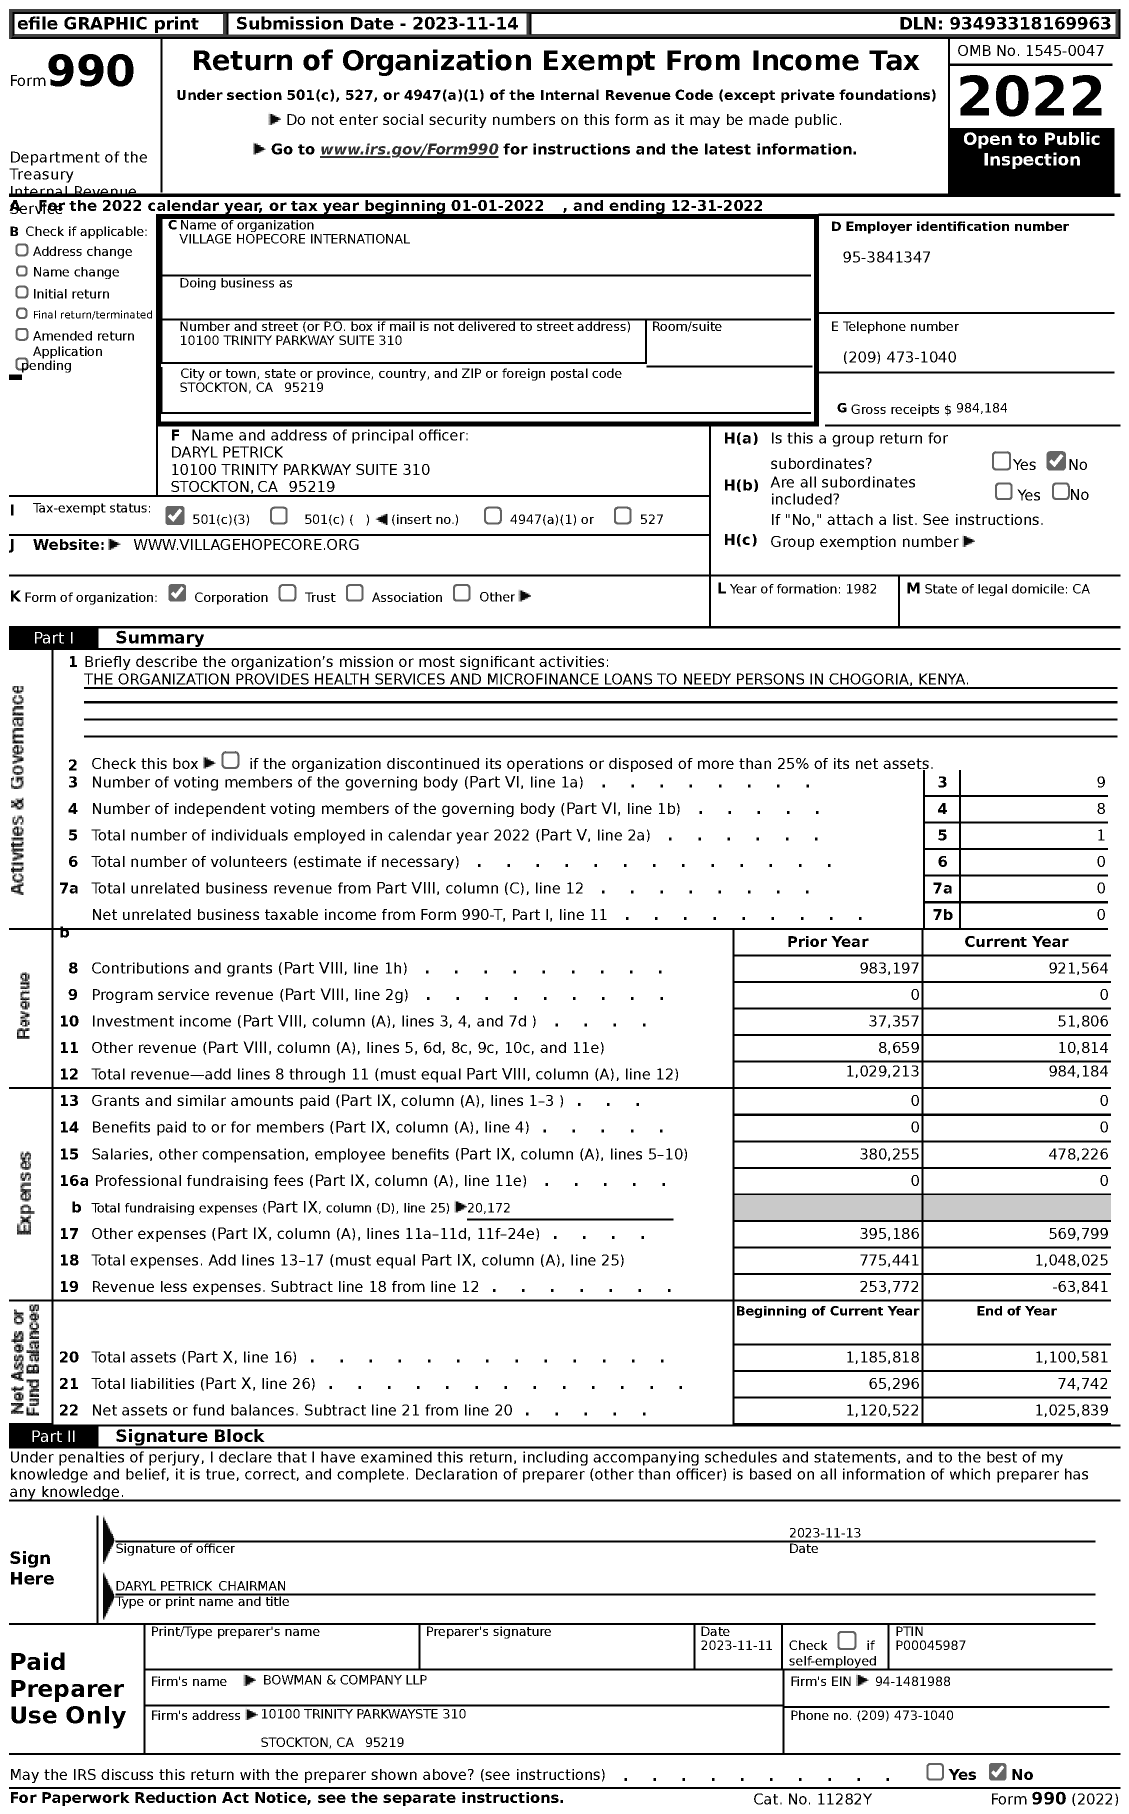 Image of first page of 2022 Form 990 for Village Hopecore International